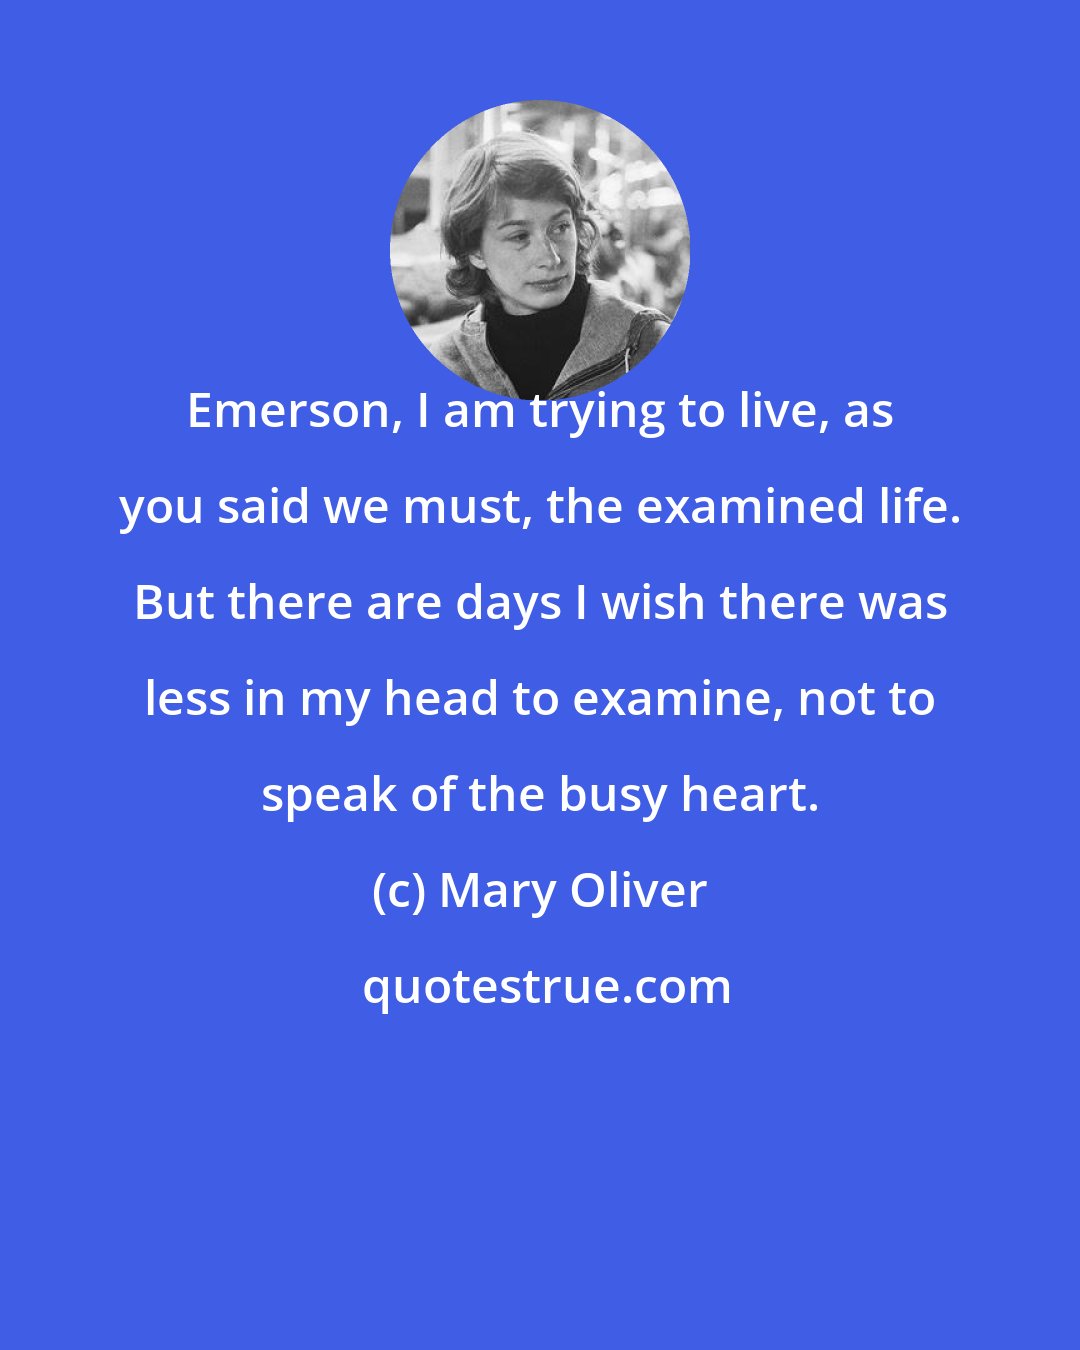 Mary Oliver: Emerson, I am trying to live, as you said we must, the examined life. But there are days I wish there was less in my head to examine, not to speak of the busy heart.